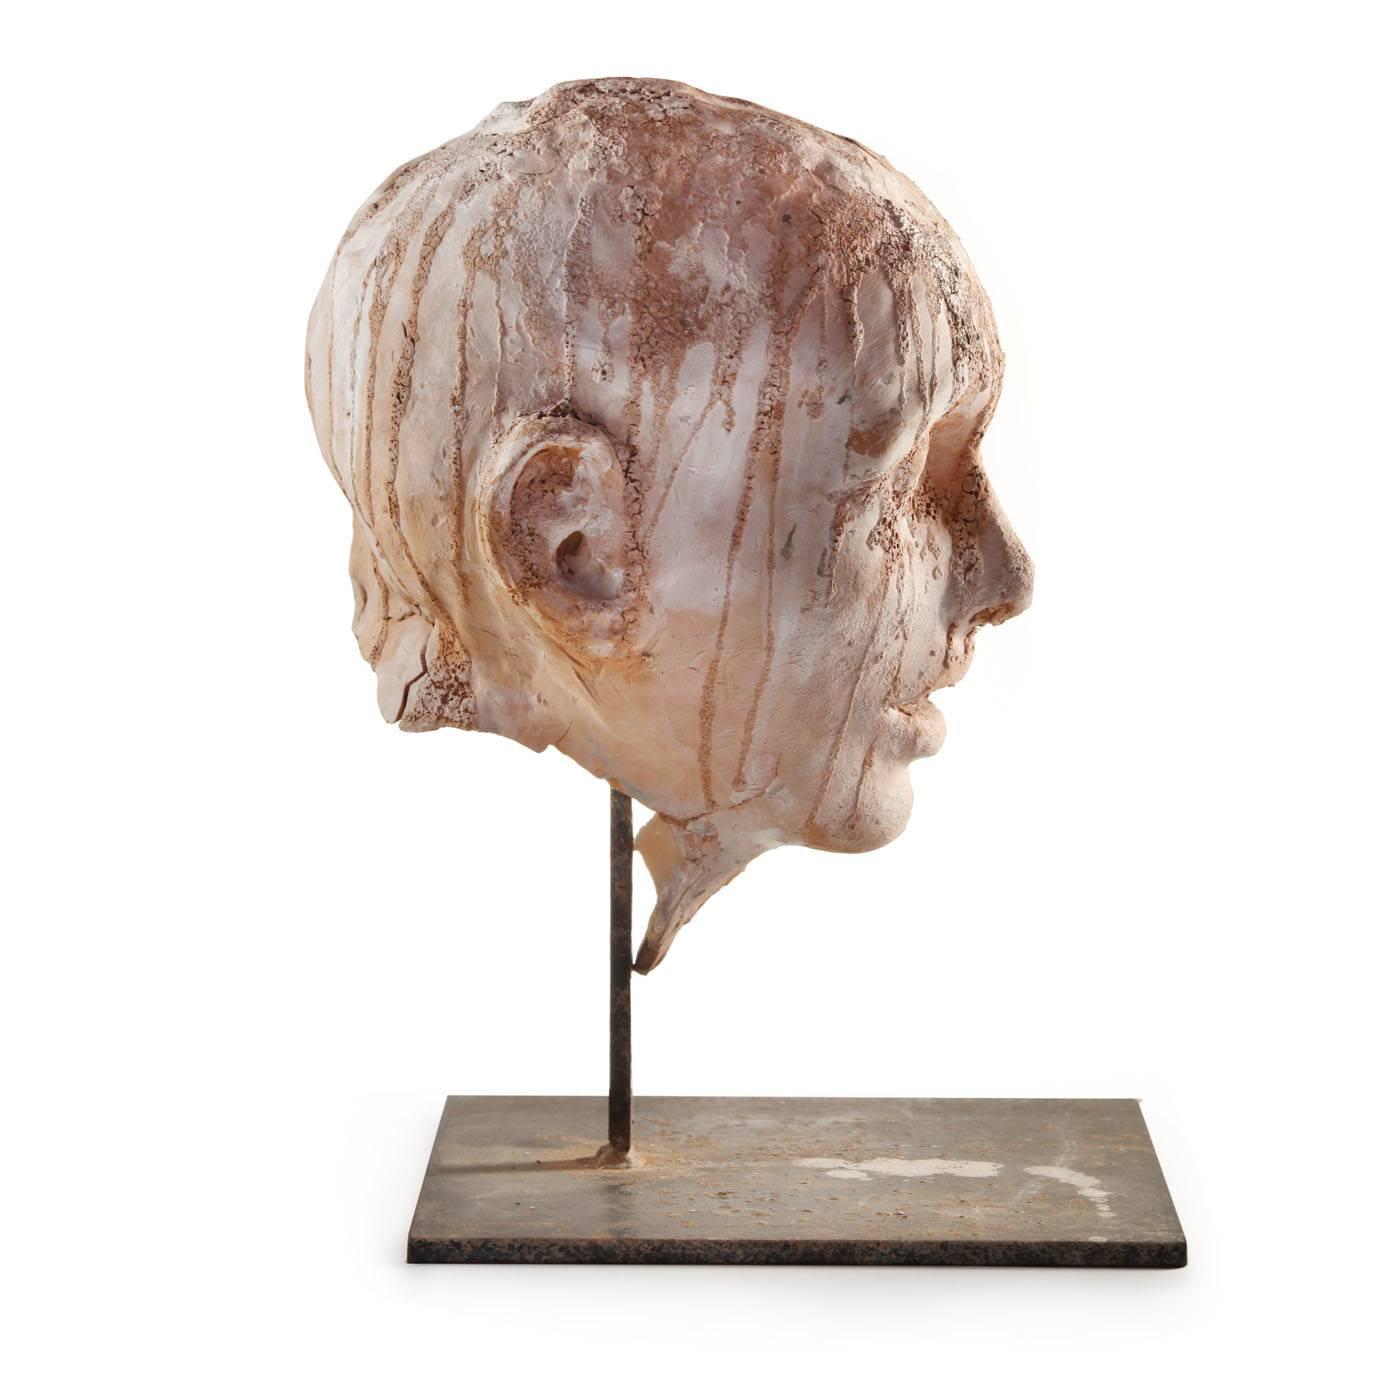 Unusual terracotta sculpture on an iron base, executed irregularly so as to convey the simultaneous concepts of construction and deterioration, two essential aspects of life, with closed eyes and a mostly rough surface on the scalp and complexion.